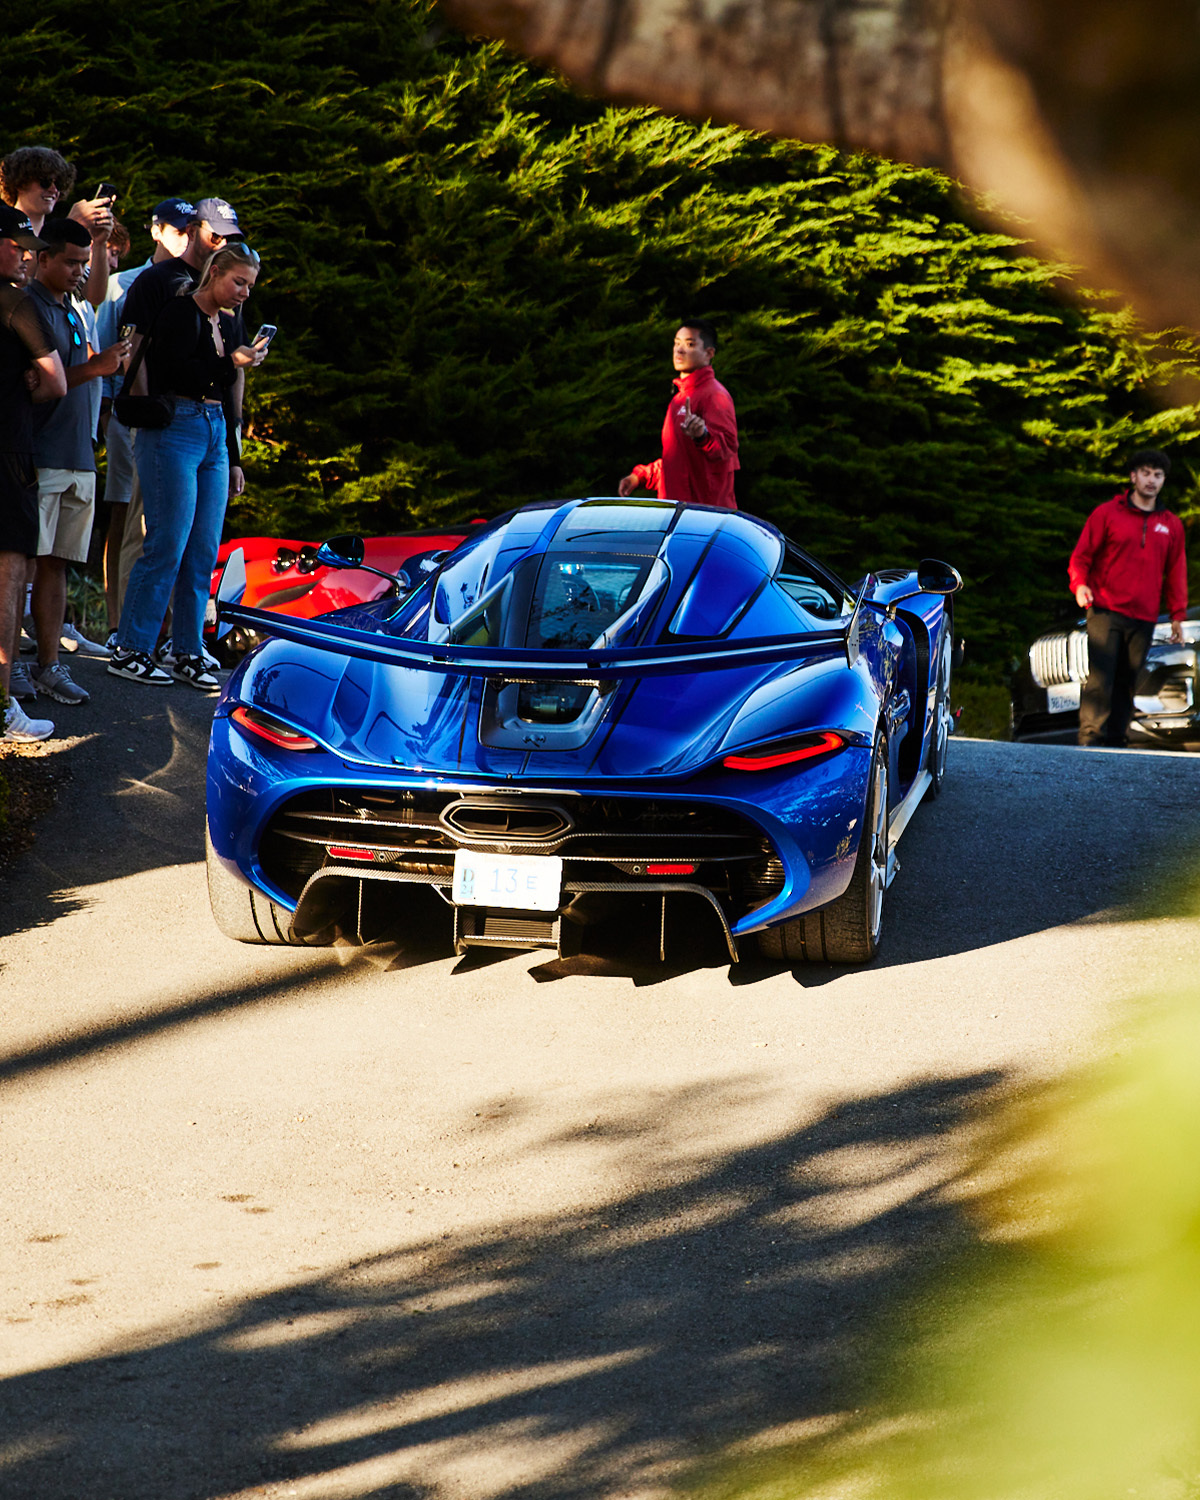 Feel the adrenaline rush of the Jesko at the Monterey Car Week  Photos by Mar...